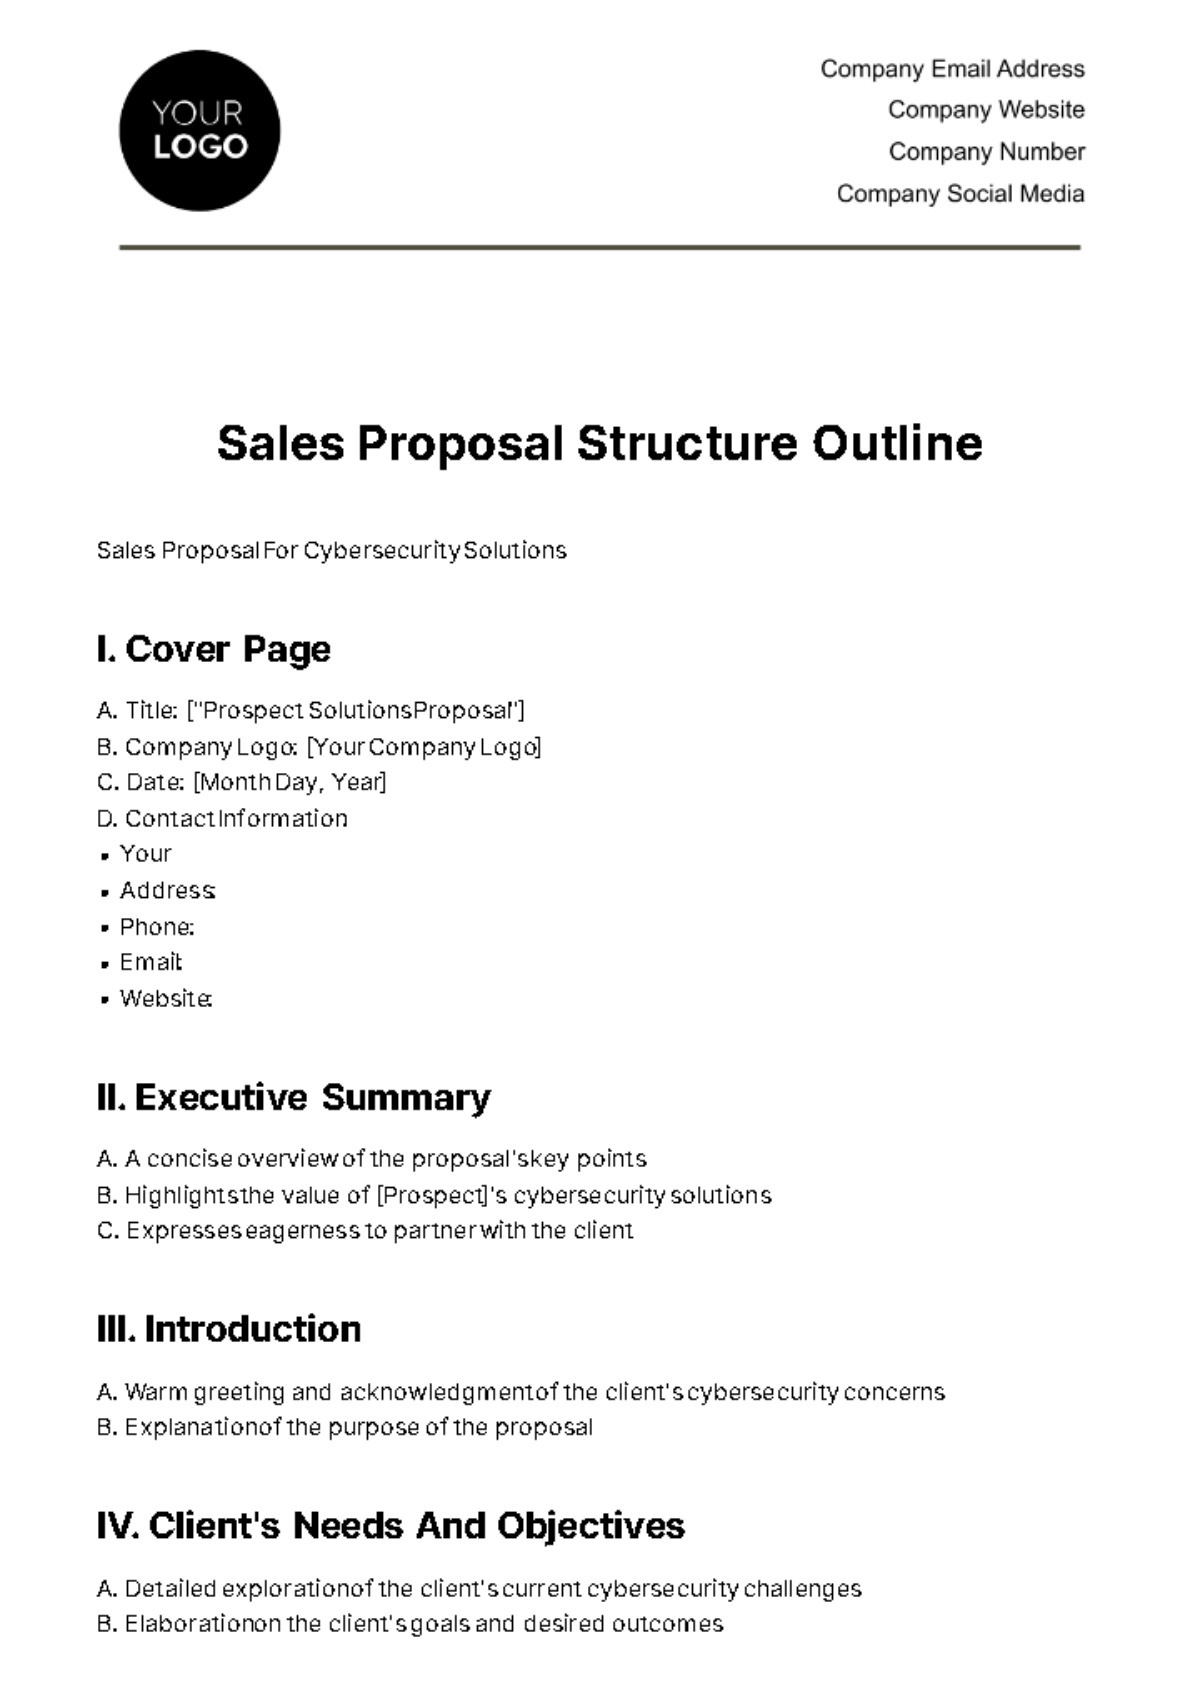 Free Sales Proposal Structure Outline Template